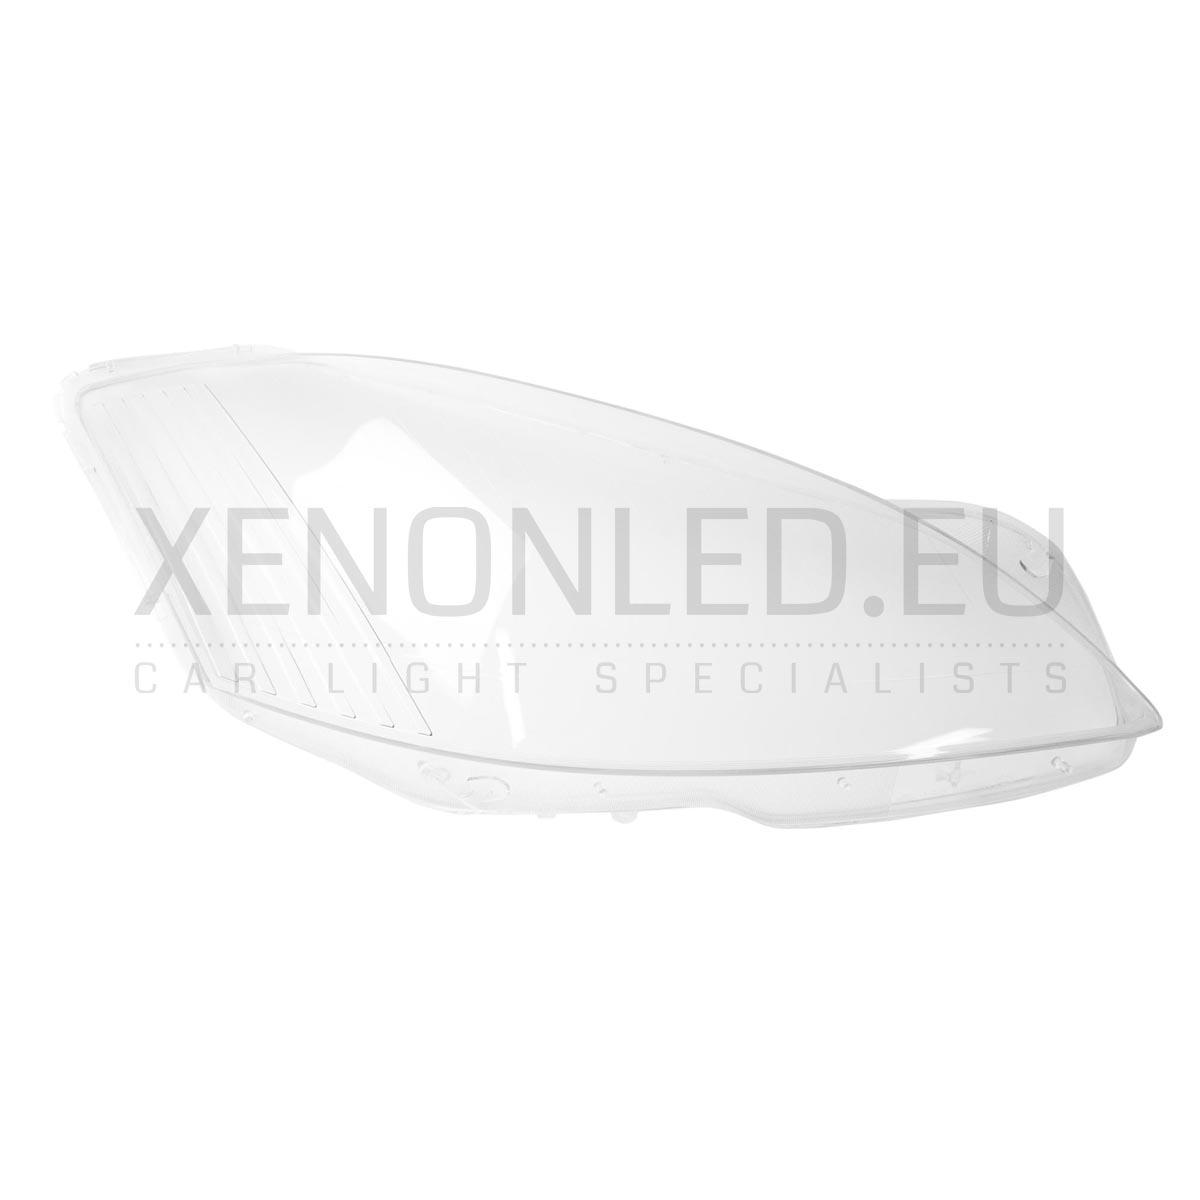 Mercedes-Benz W221 2005 - 2009 S-Class Headlight Lens Cover Right Side ...